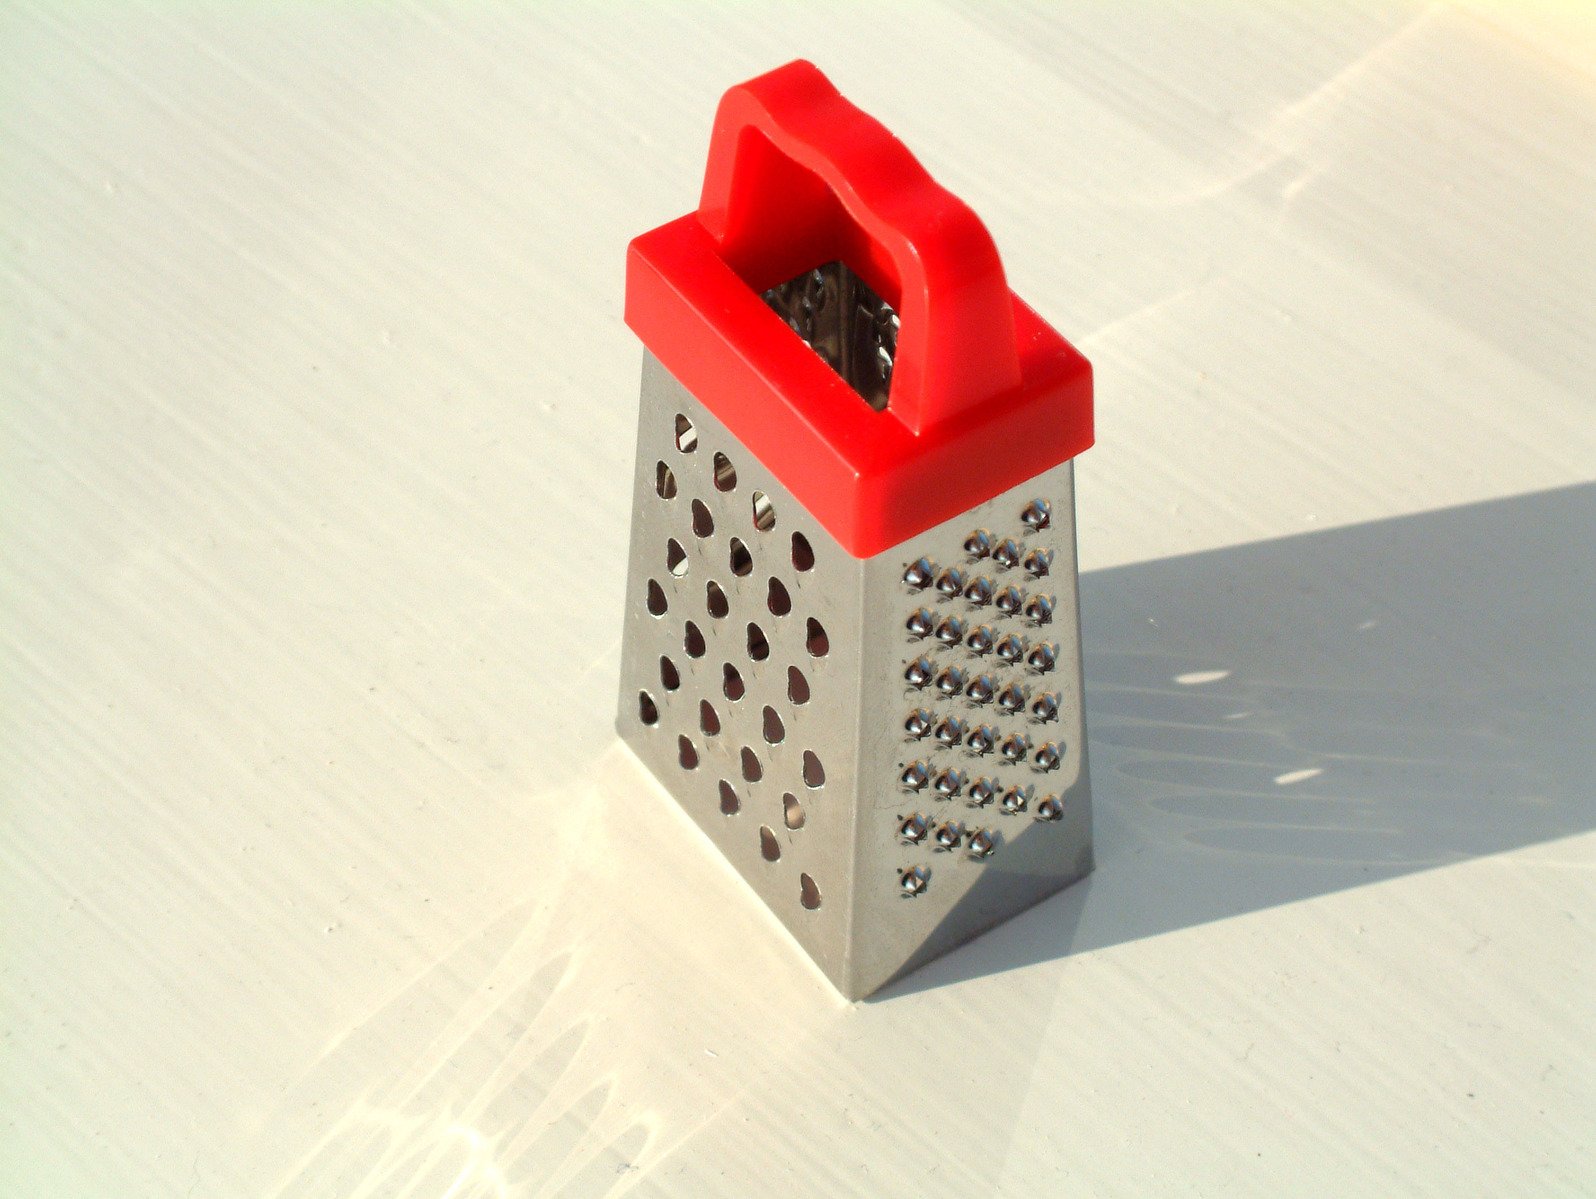 the grater is sitting on a white table